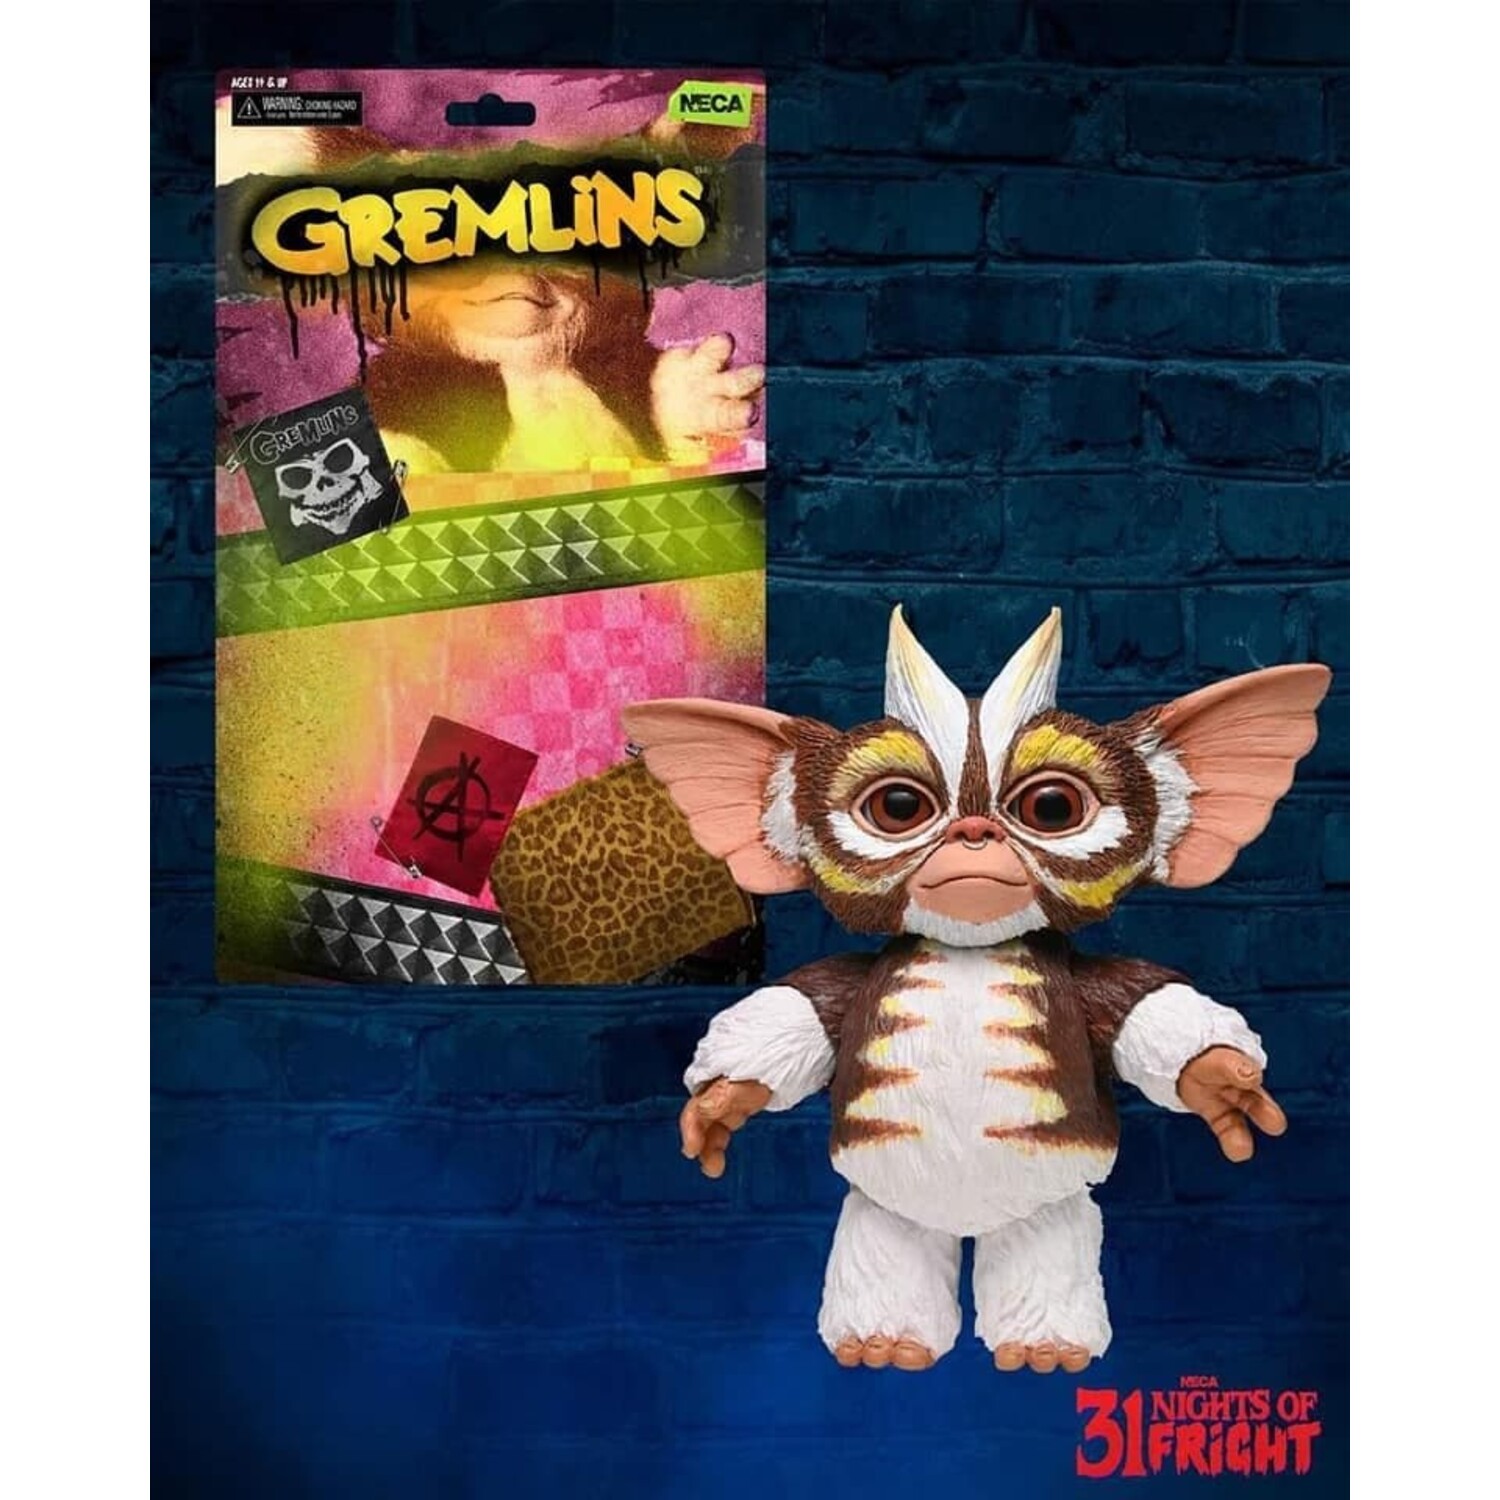 NECA Gremlins 2 The New Batch George The Mogwai Action Figure Brand New